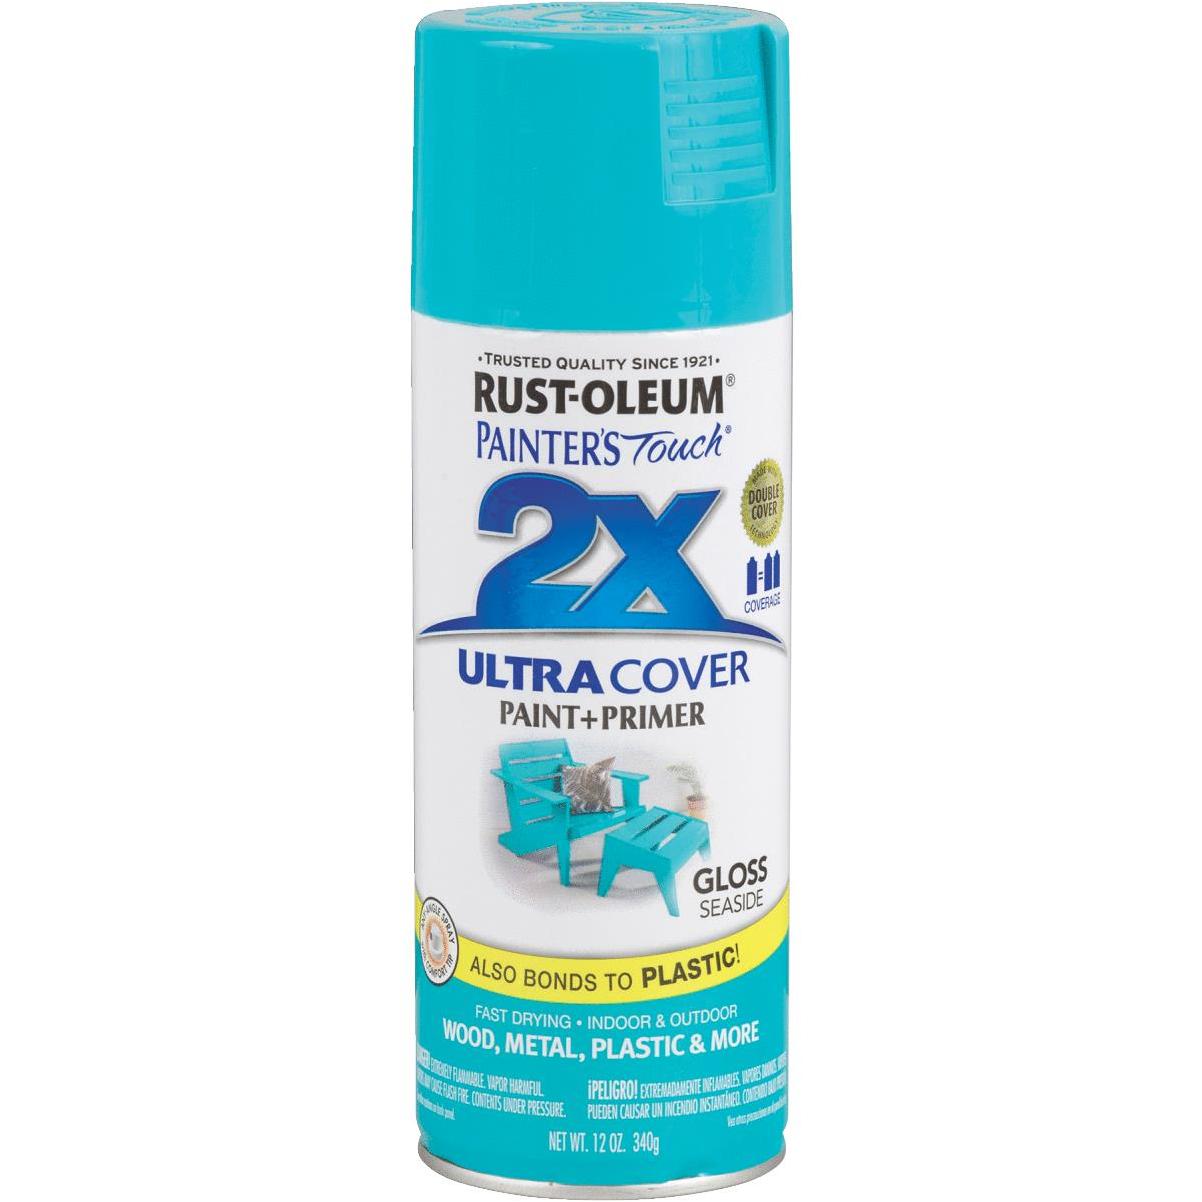 Rust-Oleum Painter's Touch 2X Ultra Cover 12 Oz. Semi-Gloss Finish